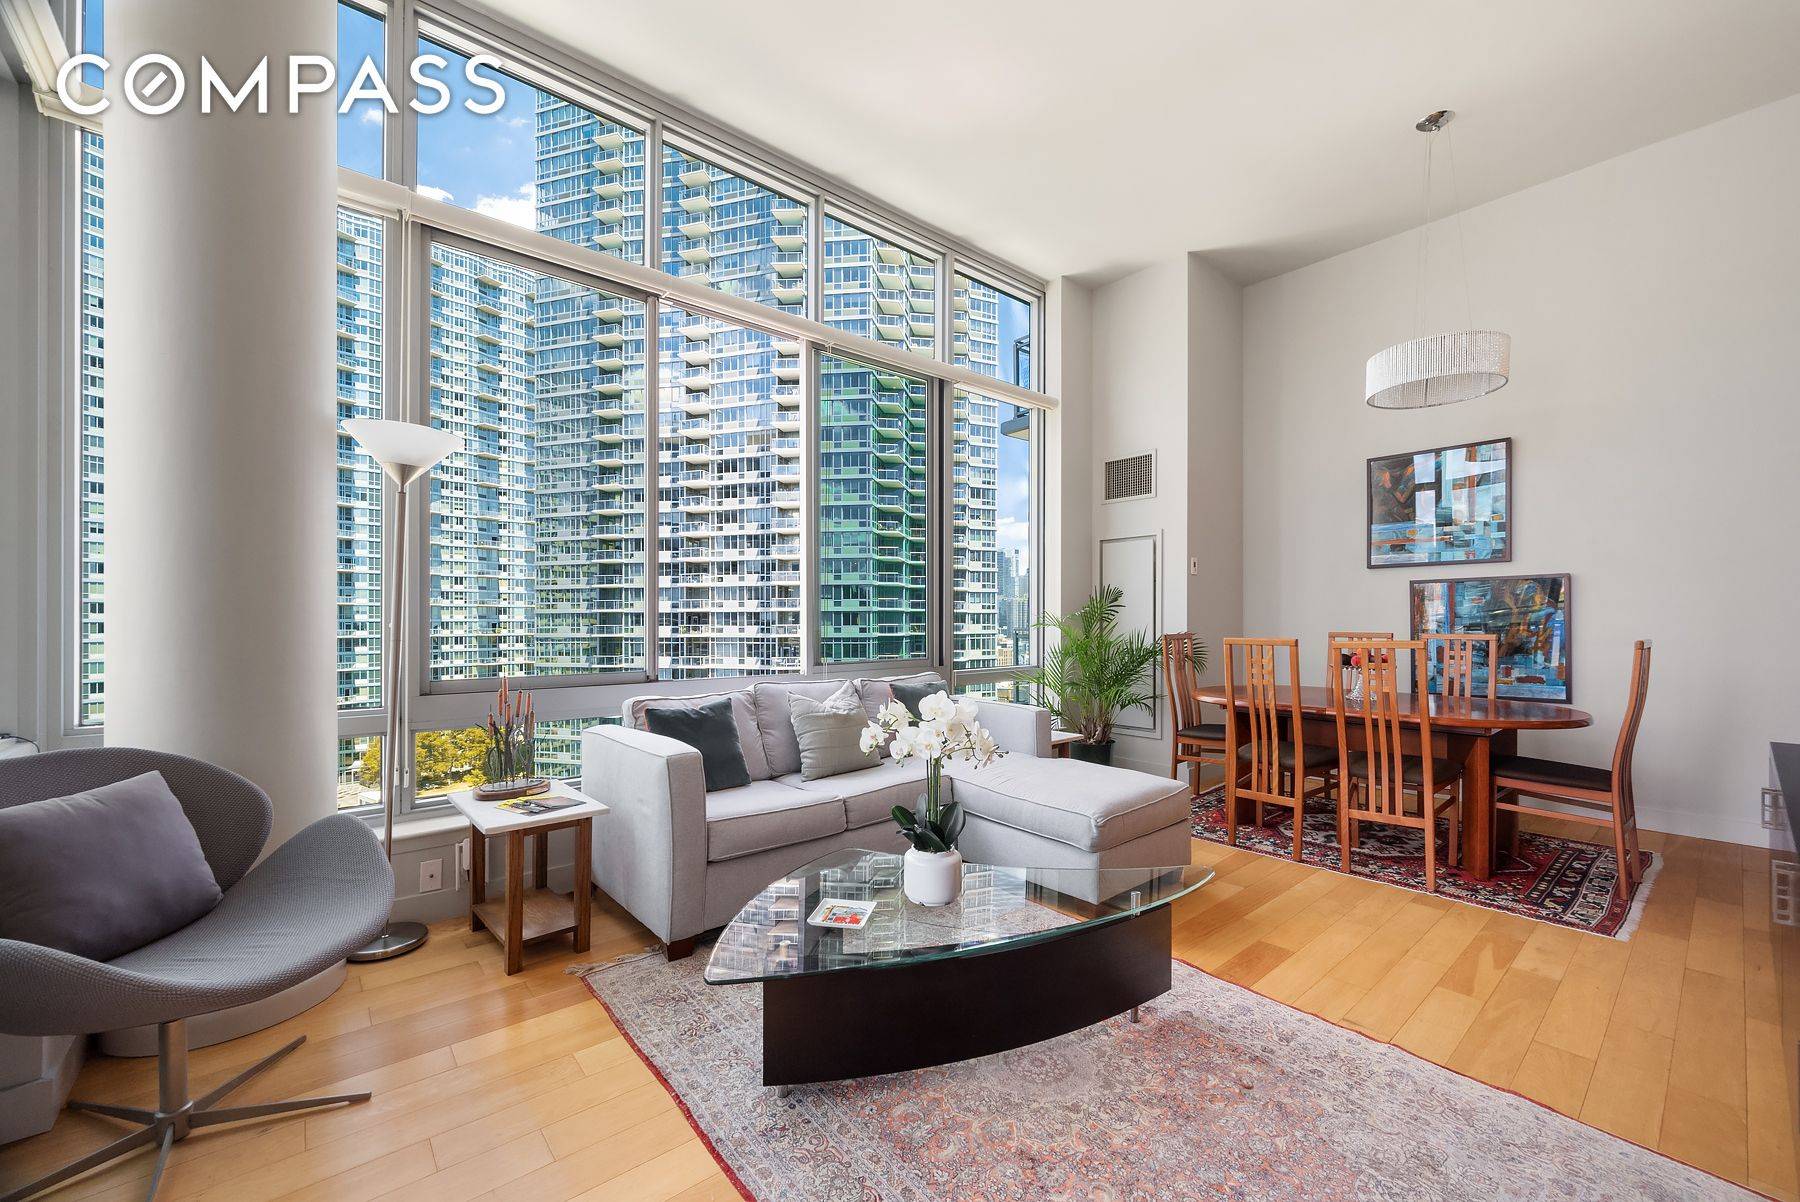 This stunning sun drenched loft like large 1 bed 1 bath home boasts floor to ceiling windows, hardwood floors throughout and a private western facing balcony right off the spacious ...